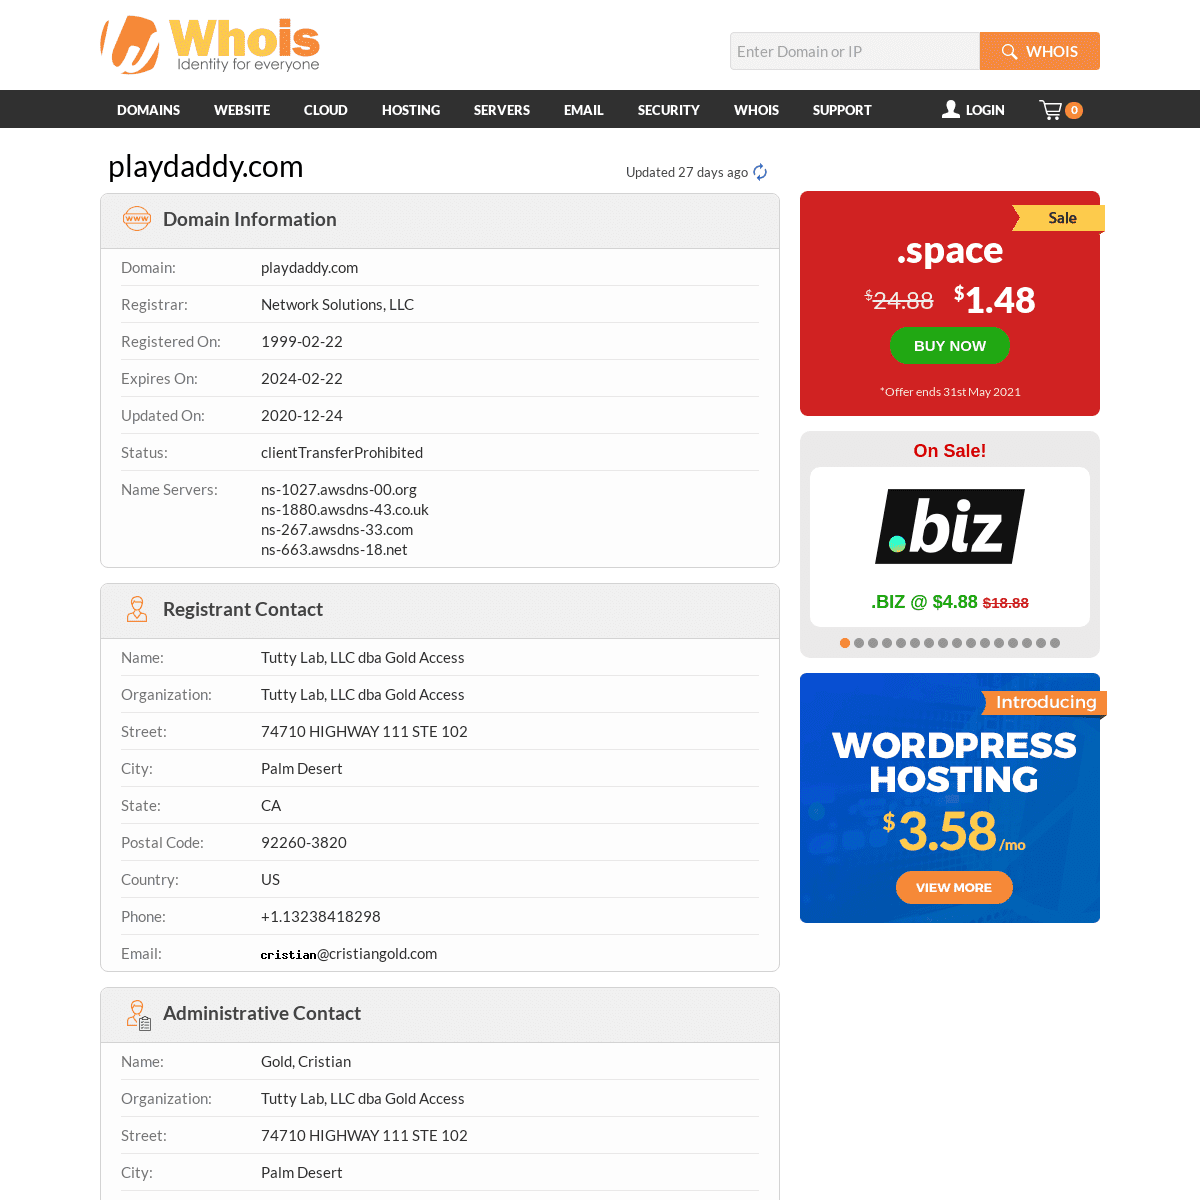 A complete backup of https://www.whois.com/whois/playdaddy.com